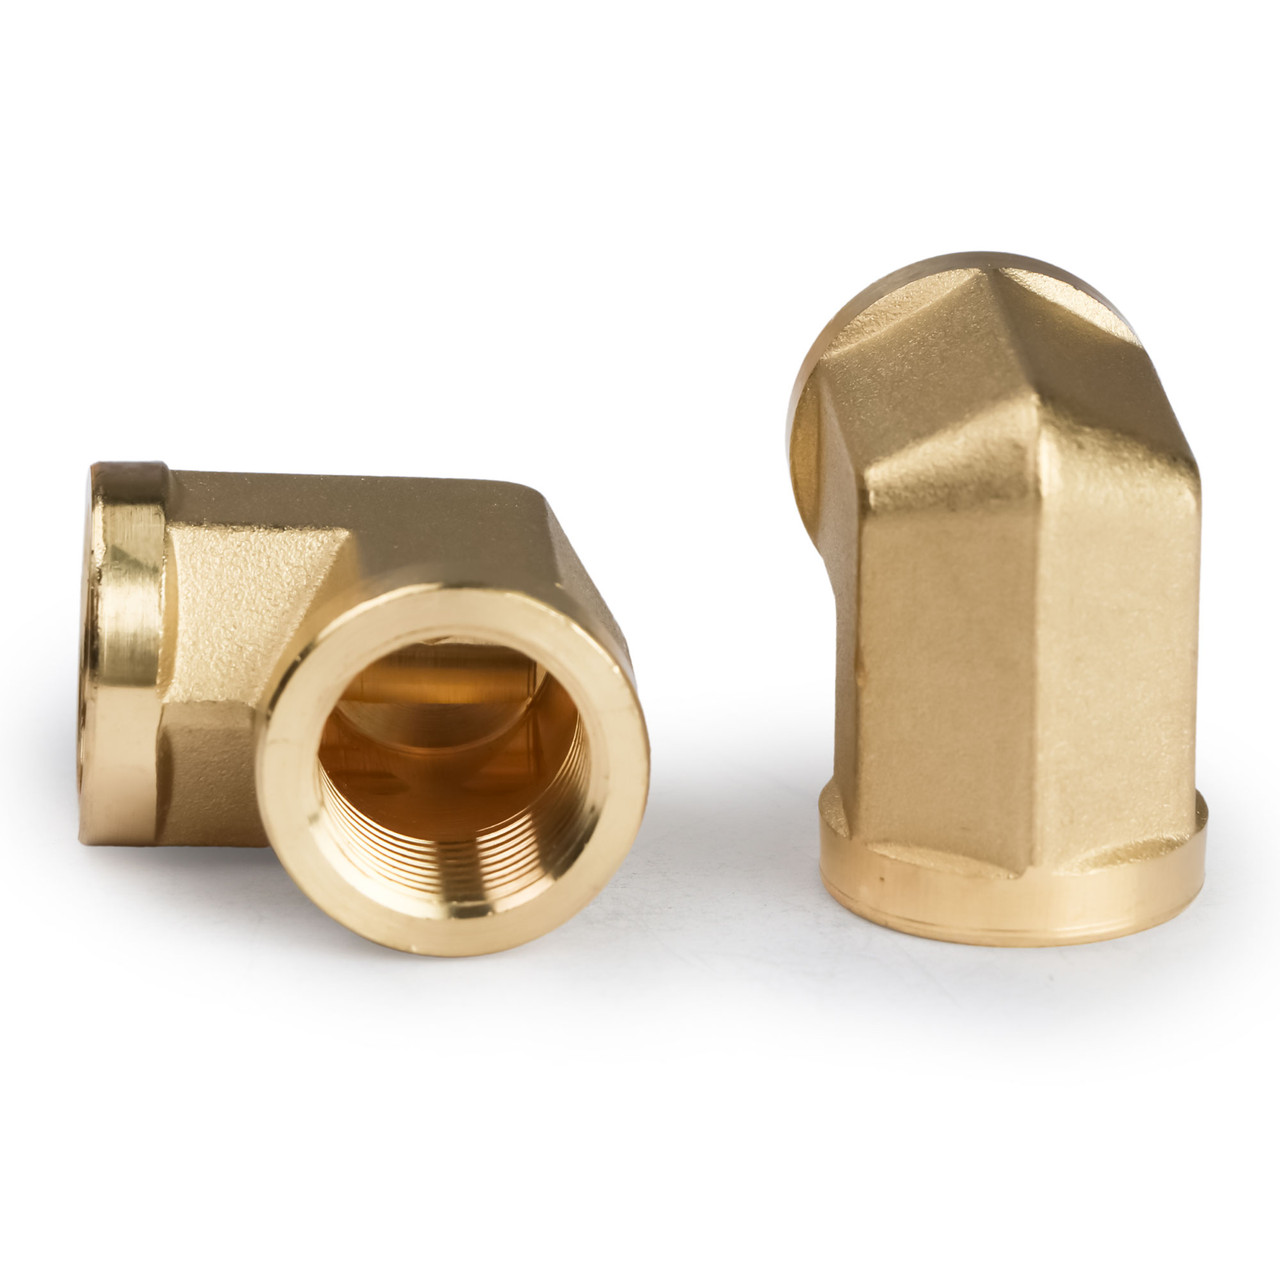 U.S. Solid 2pcs 90 Degree Barstock Street Elbow Brass Pipe Fitting 3/8 NPT  Female Pipe to 3/8 NPT Female